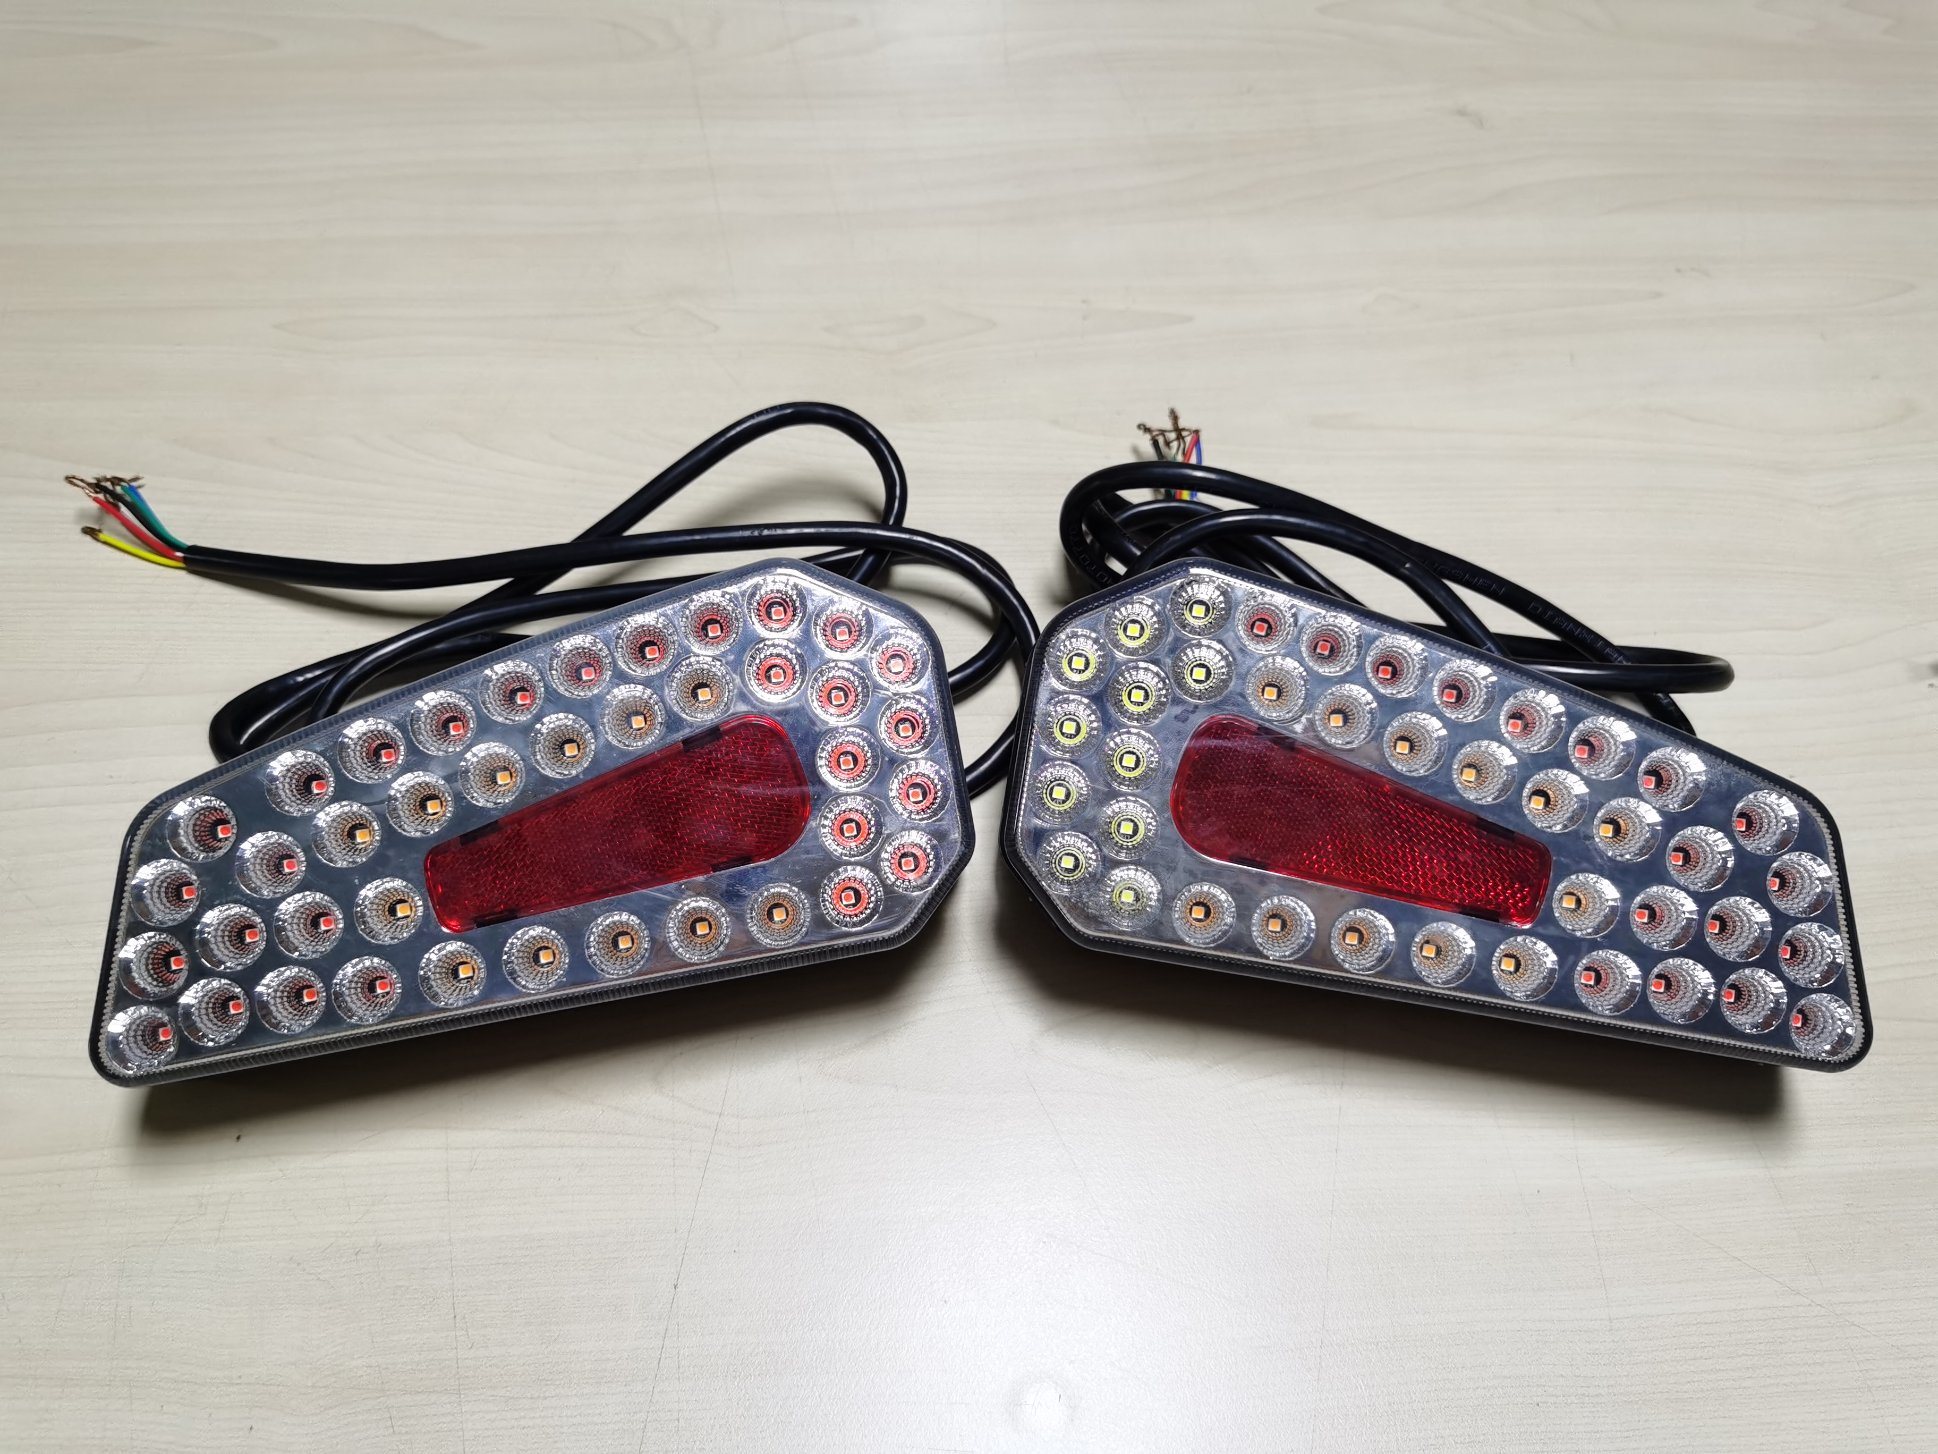 New Auto Rear Lamp for Bike Carriers/Racks Position/Stop/Fog/Reverse/Direction/Plate LED Tail Light